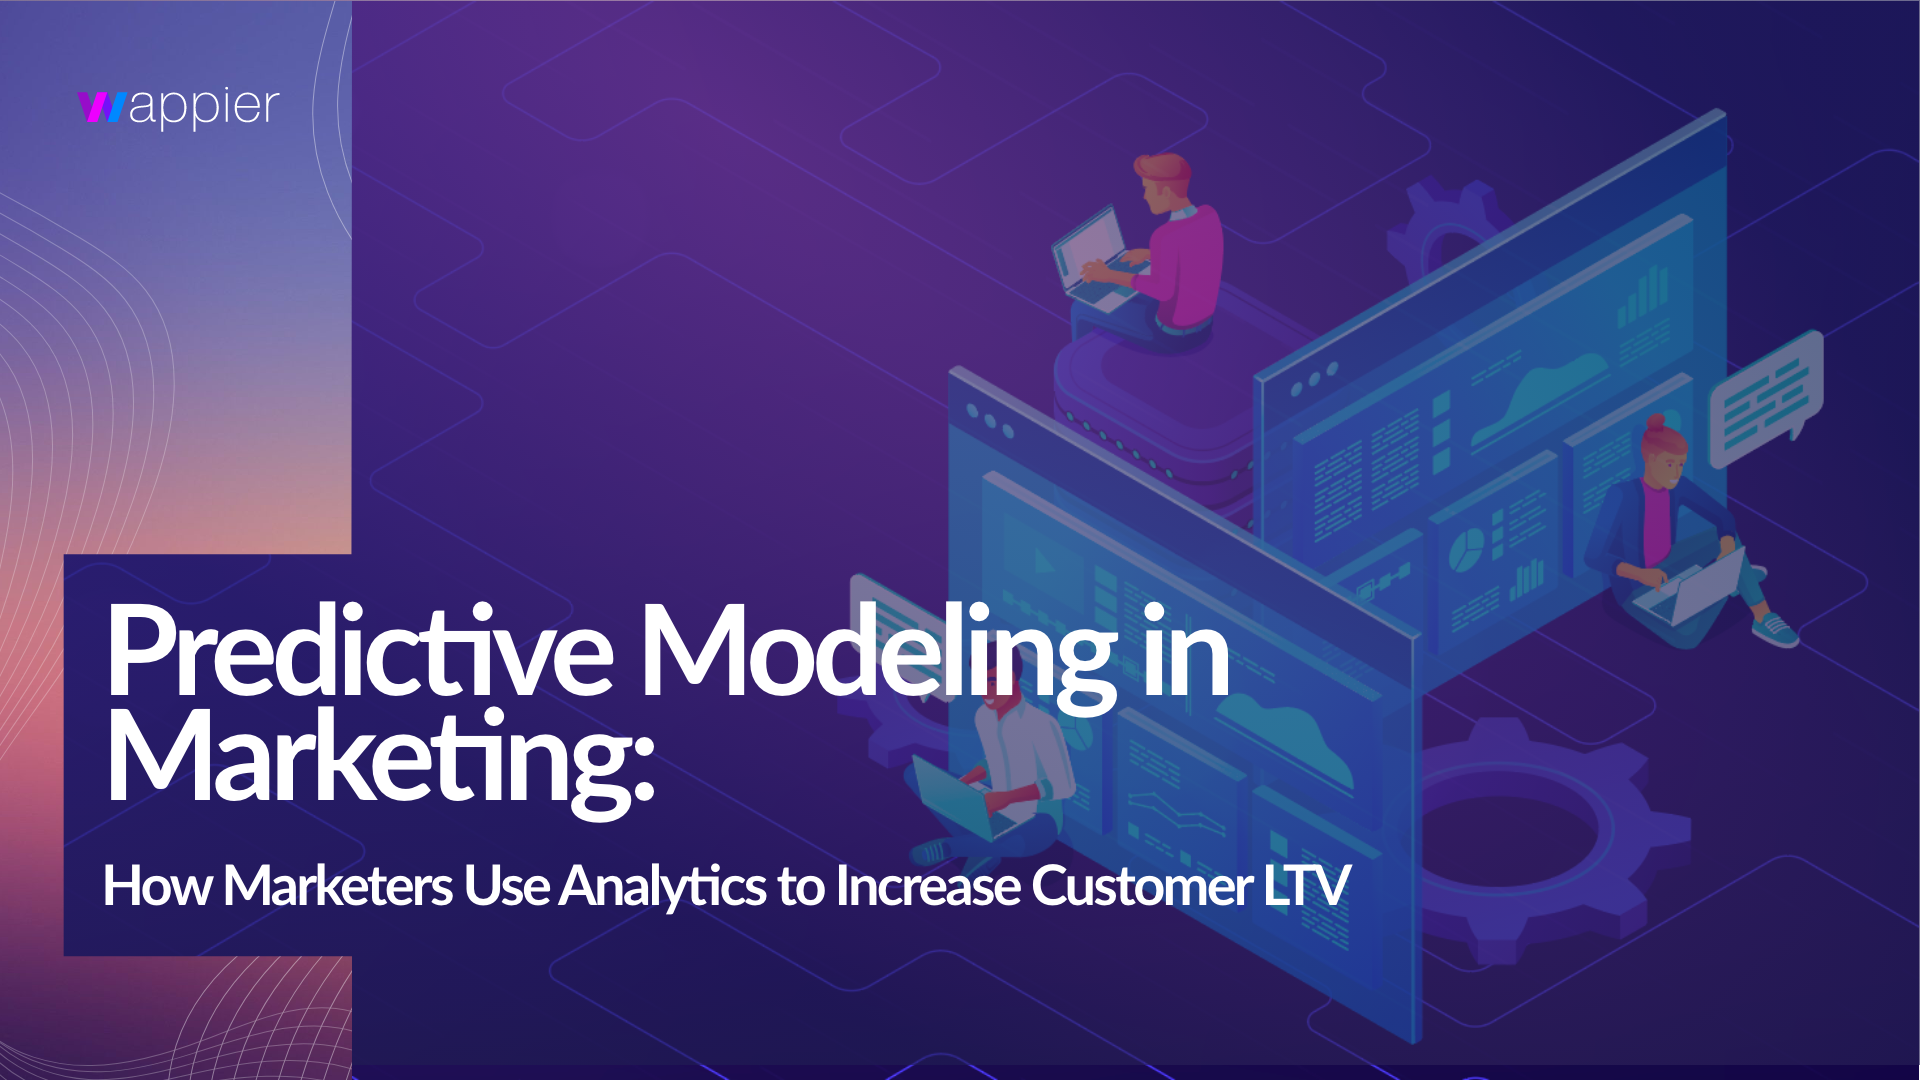 image for wappier article 'Predictive Modeling in Marketing: How Marketers Use Analytics to Increase Customer LTV'